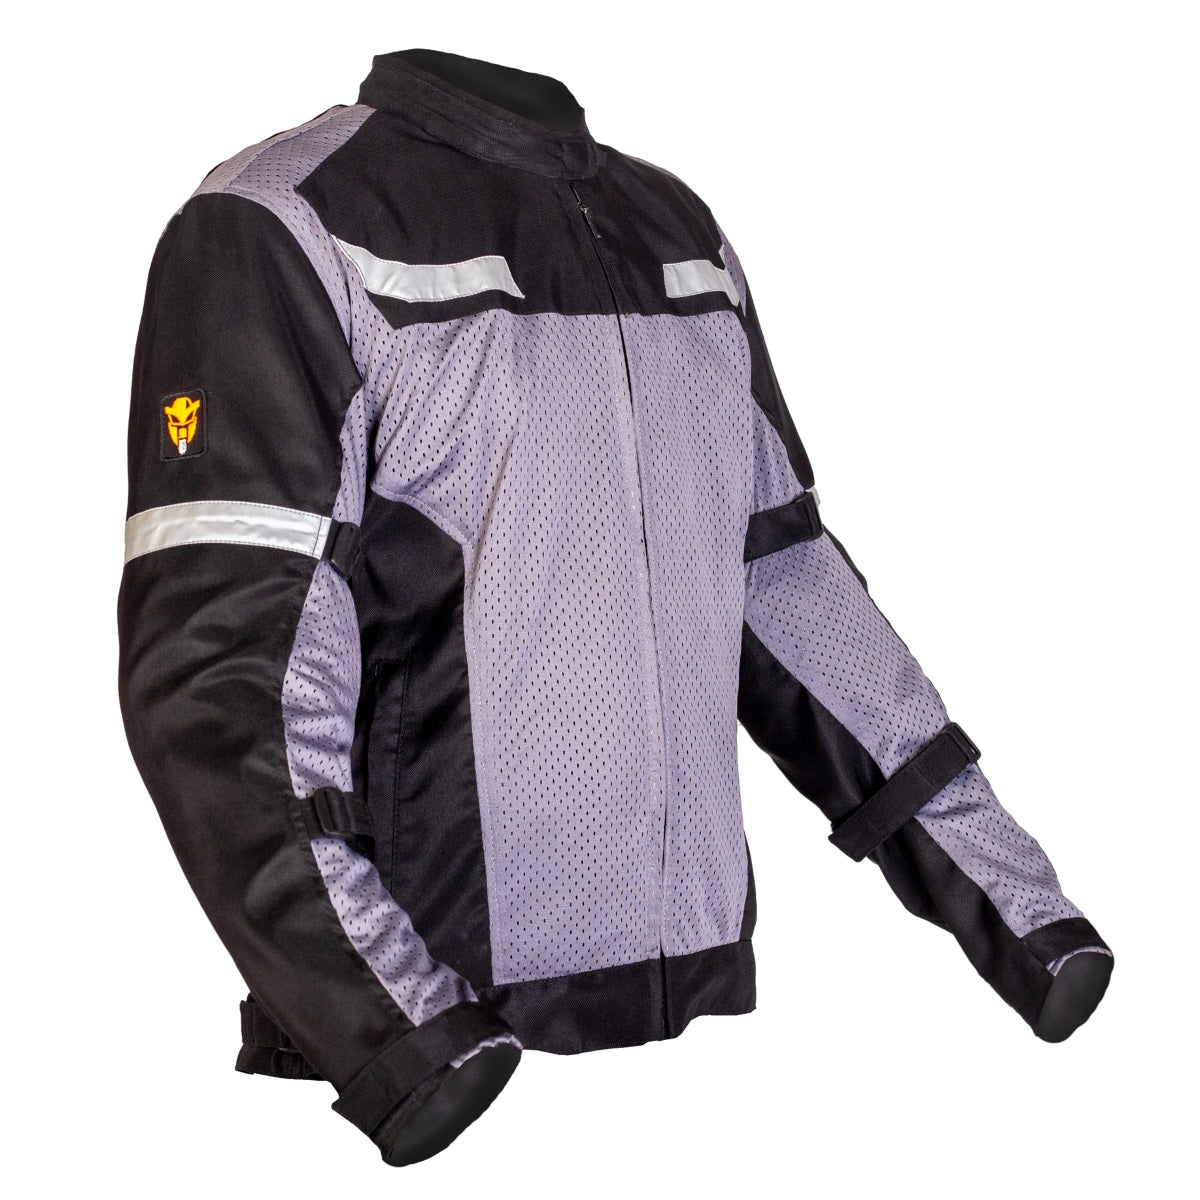 Riding Jackets  Buy Bike Riding Jackets For Men Online